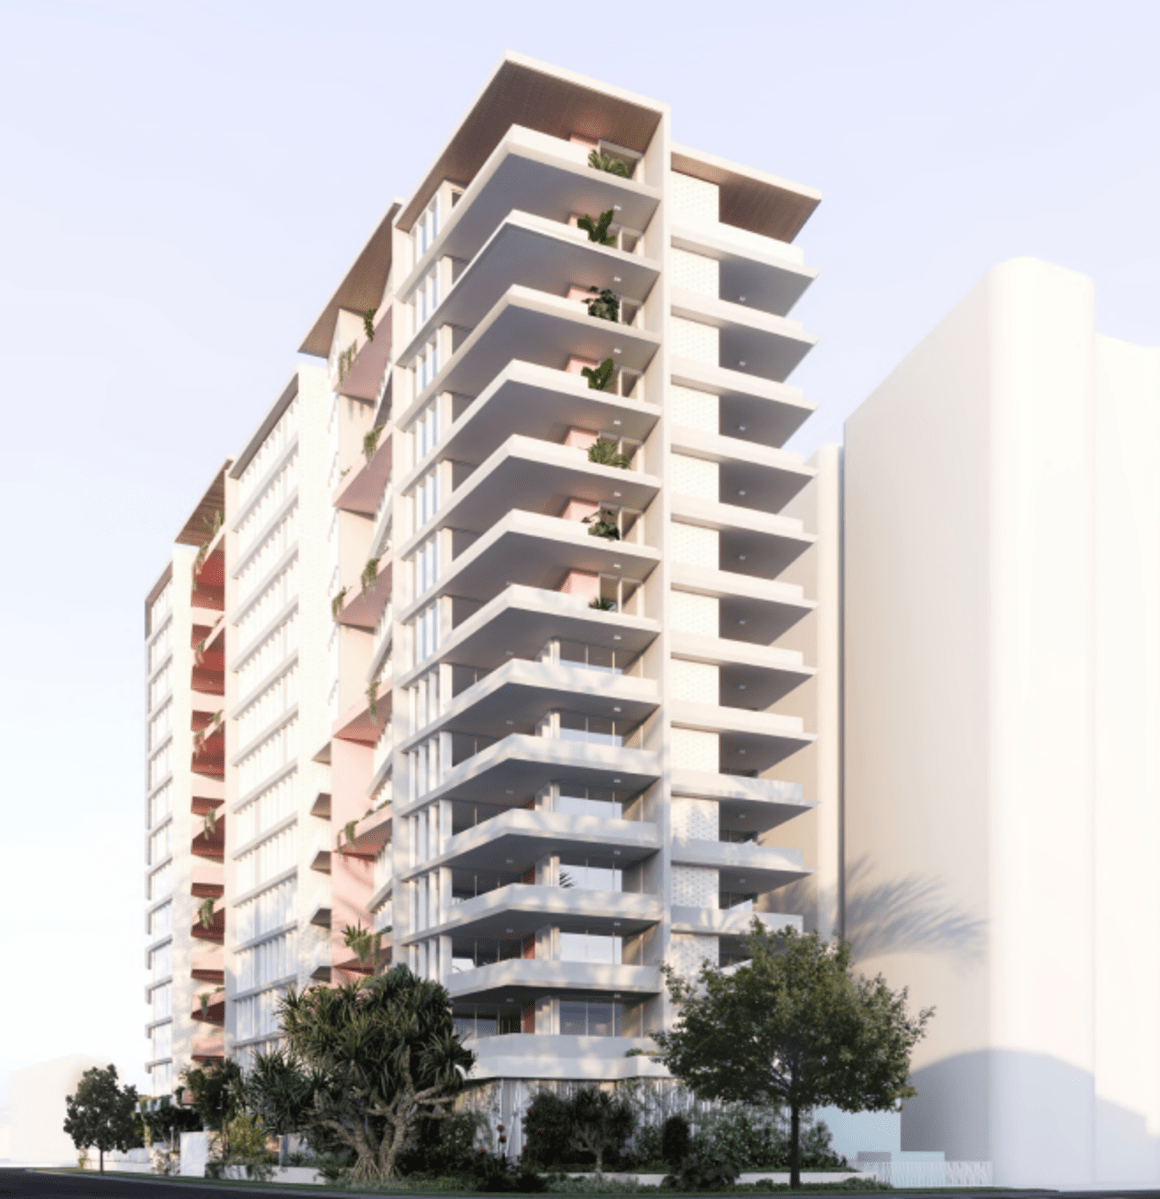 First look exclusive: Coolangatta's newest apartment tower plans revealed